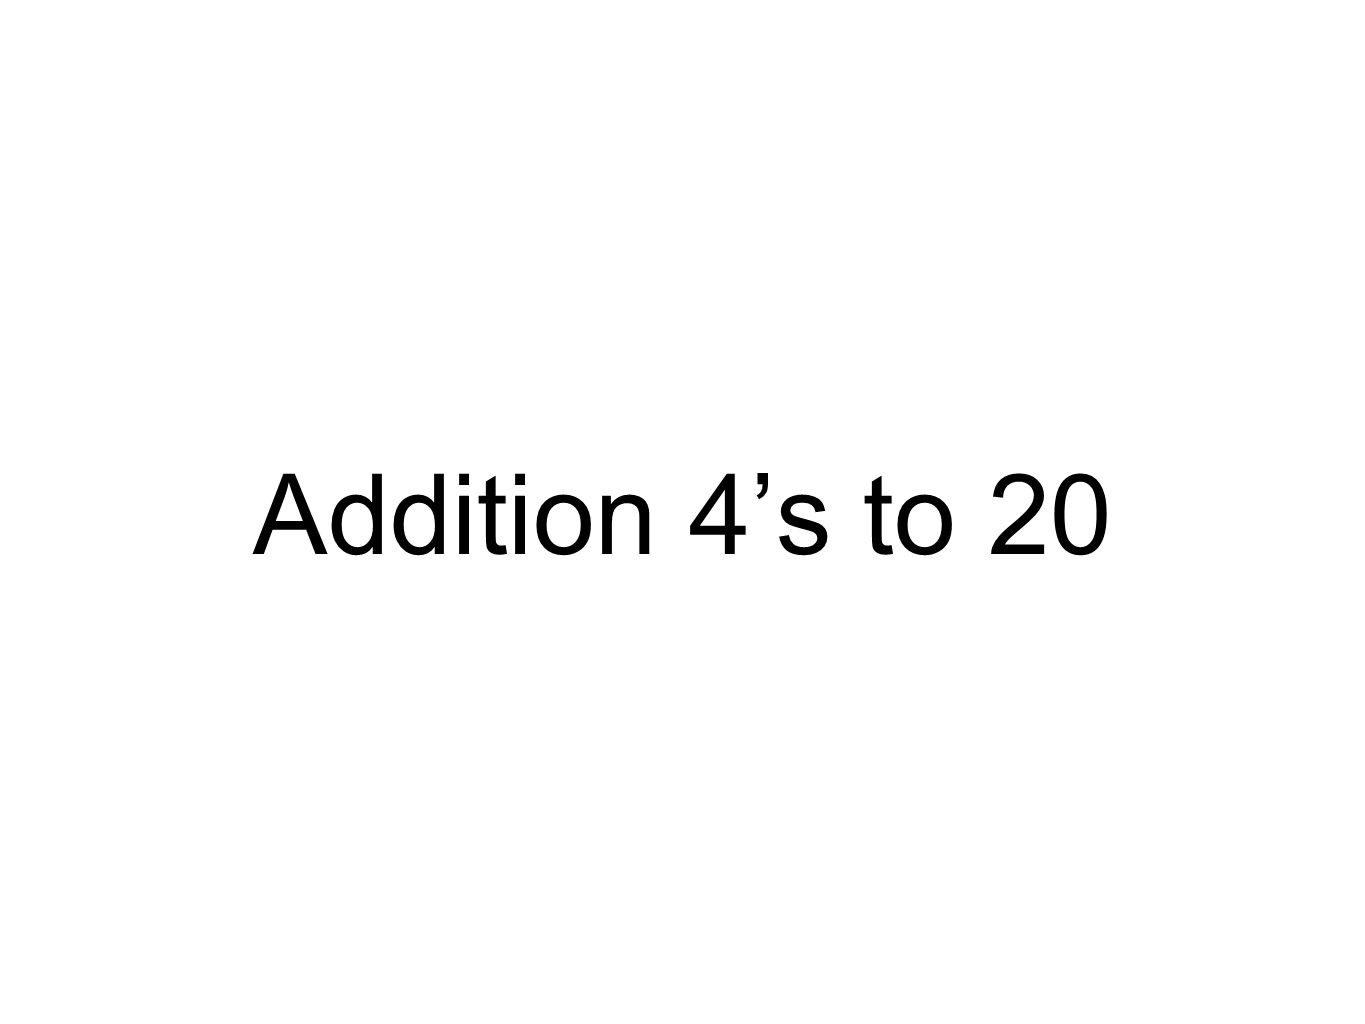 Addition 4’s to 20